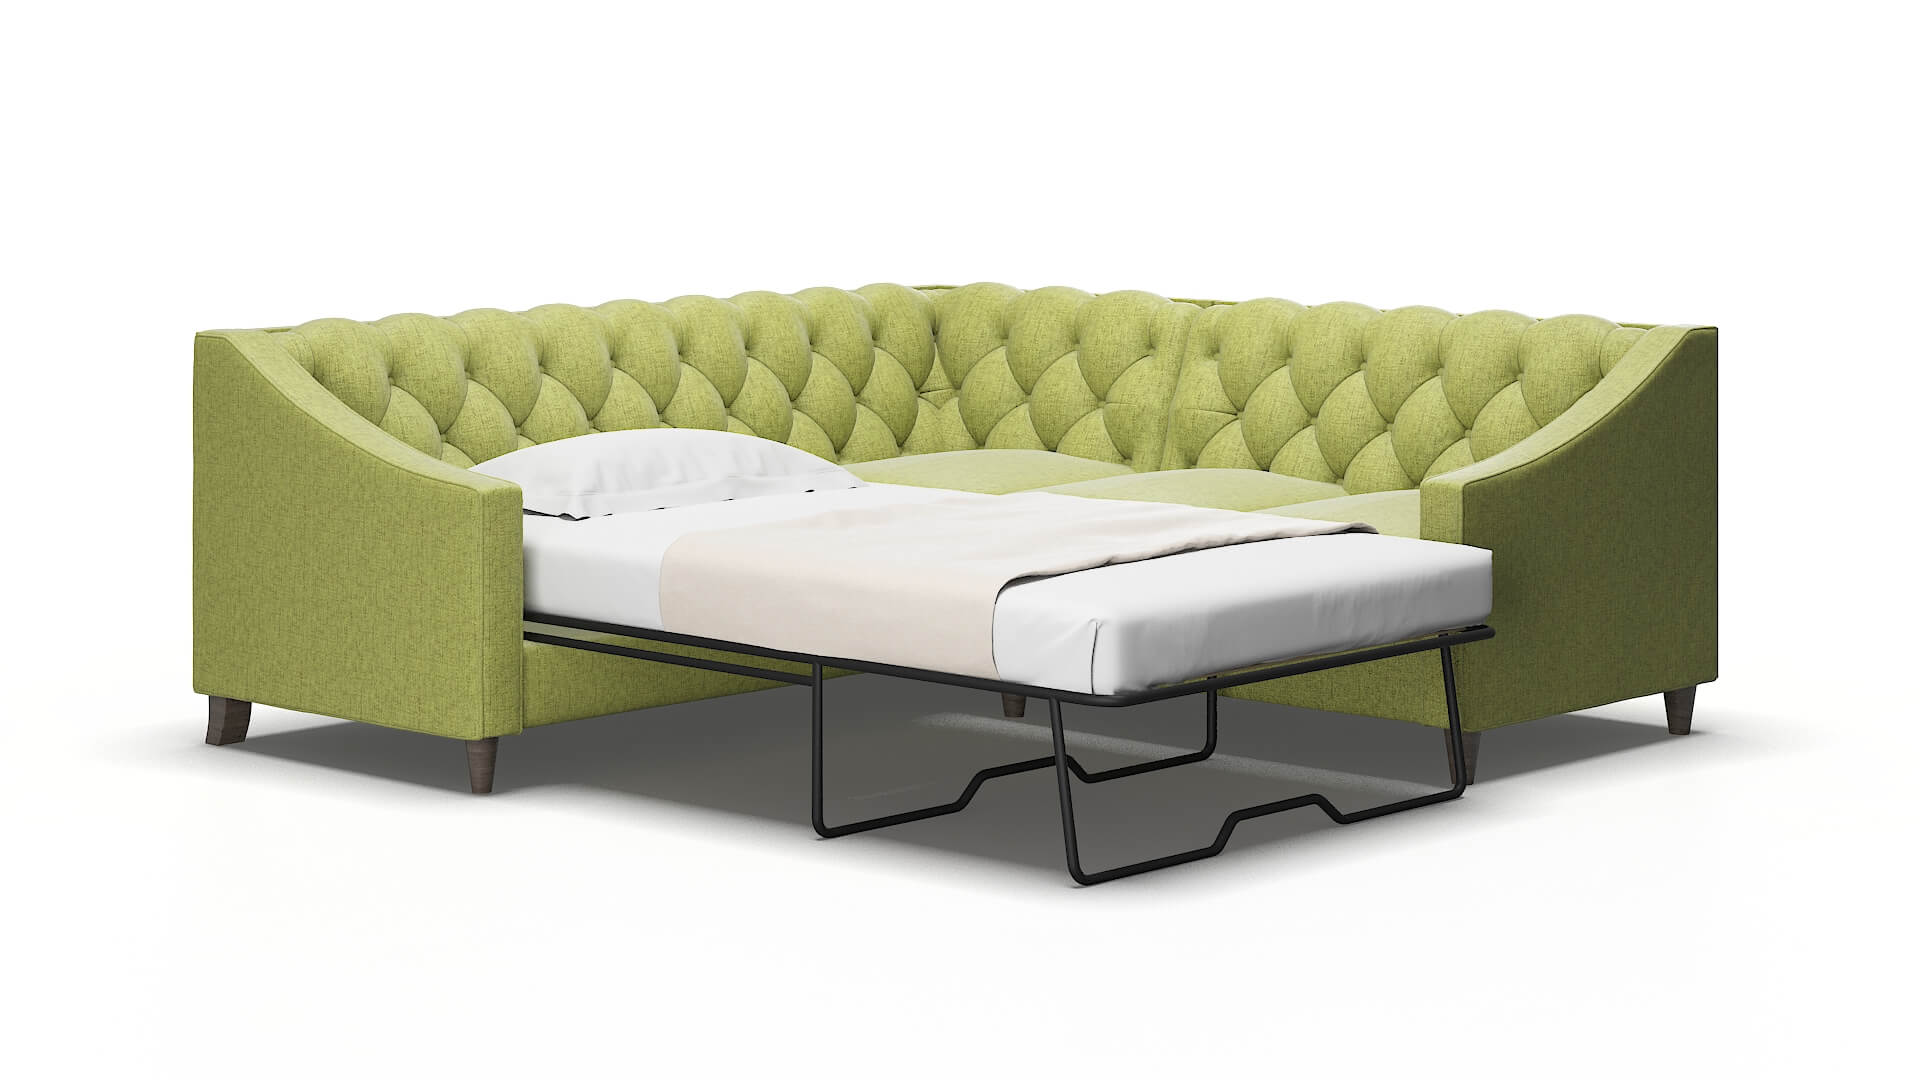 Manchester Notion Appletini Sectional Sleeper 2